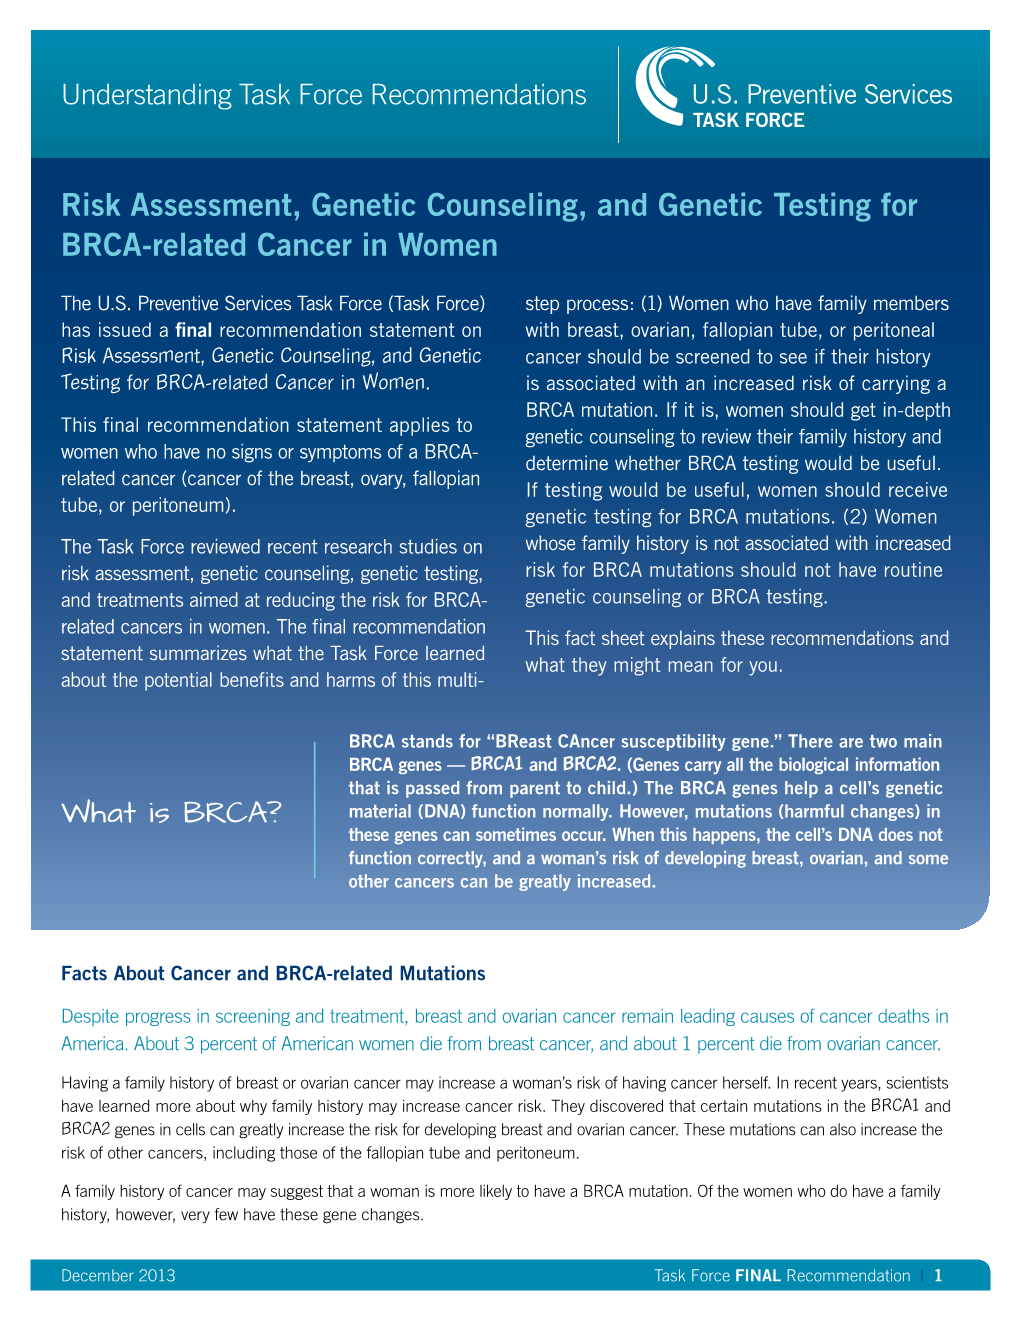 Risk Assessment, Genetic Counseling, and Genetic Testing for BRCA-Related Cancer in Women